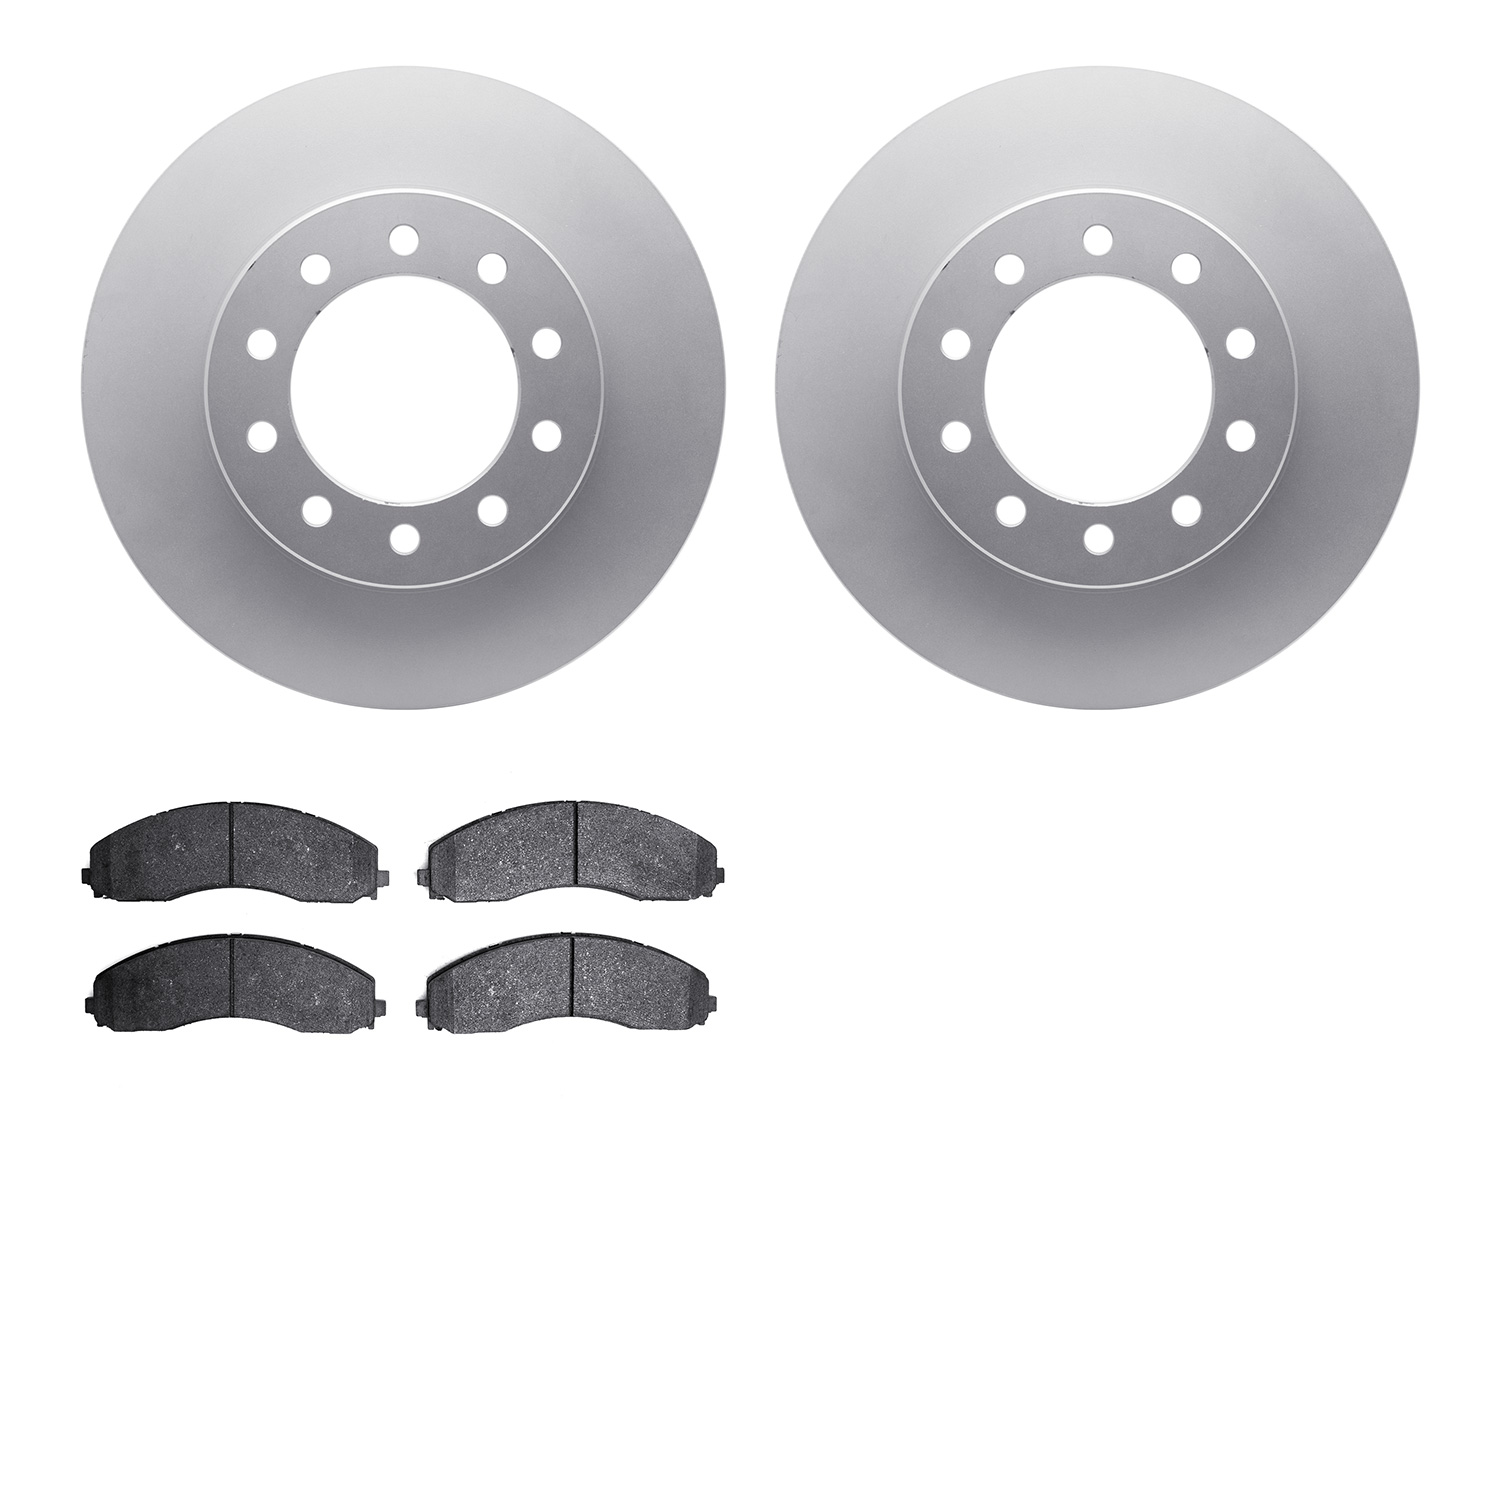 4202-99211 Geospec Brake Rotors w/Heavy-Duty Brake Pads Kit, Fits Select Ford/Lincoln/Mercury/Mazda, Position: Front